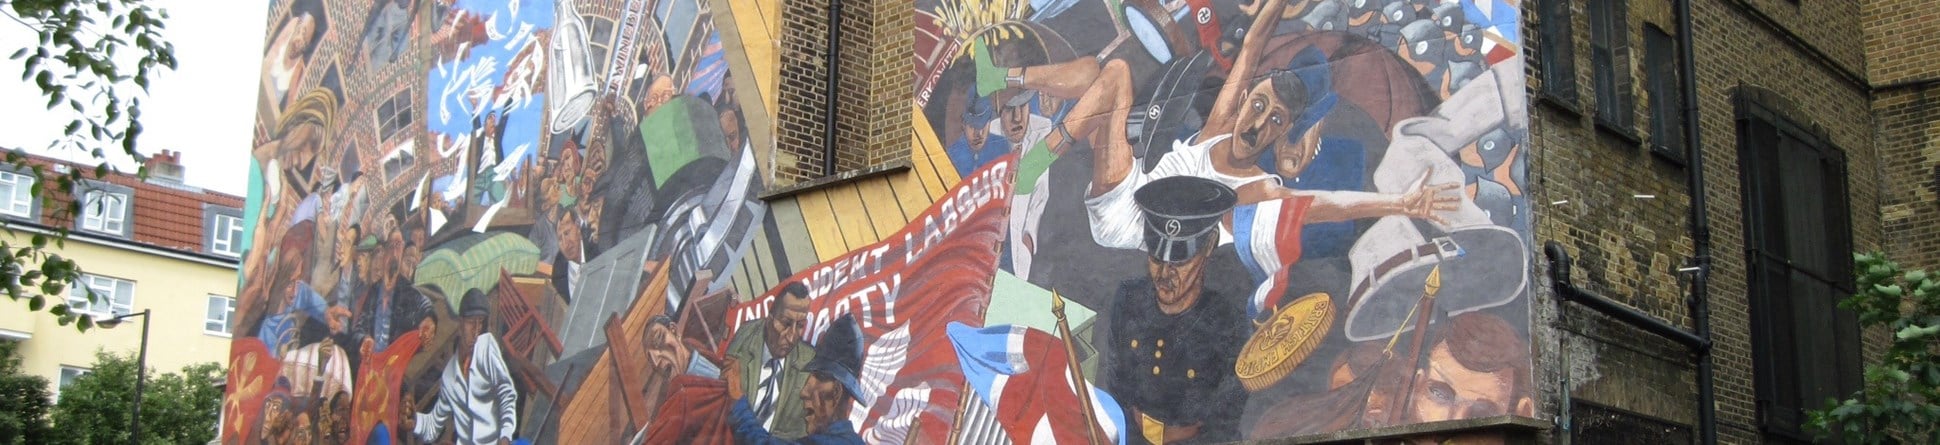 Image of the Cable Street Mural, East London. It commemorates the Battle of Cable Street which took place on Sunday 4 October 1936.